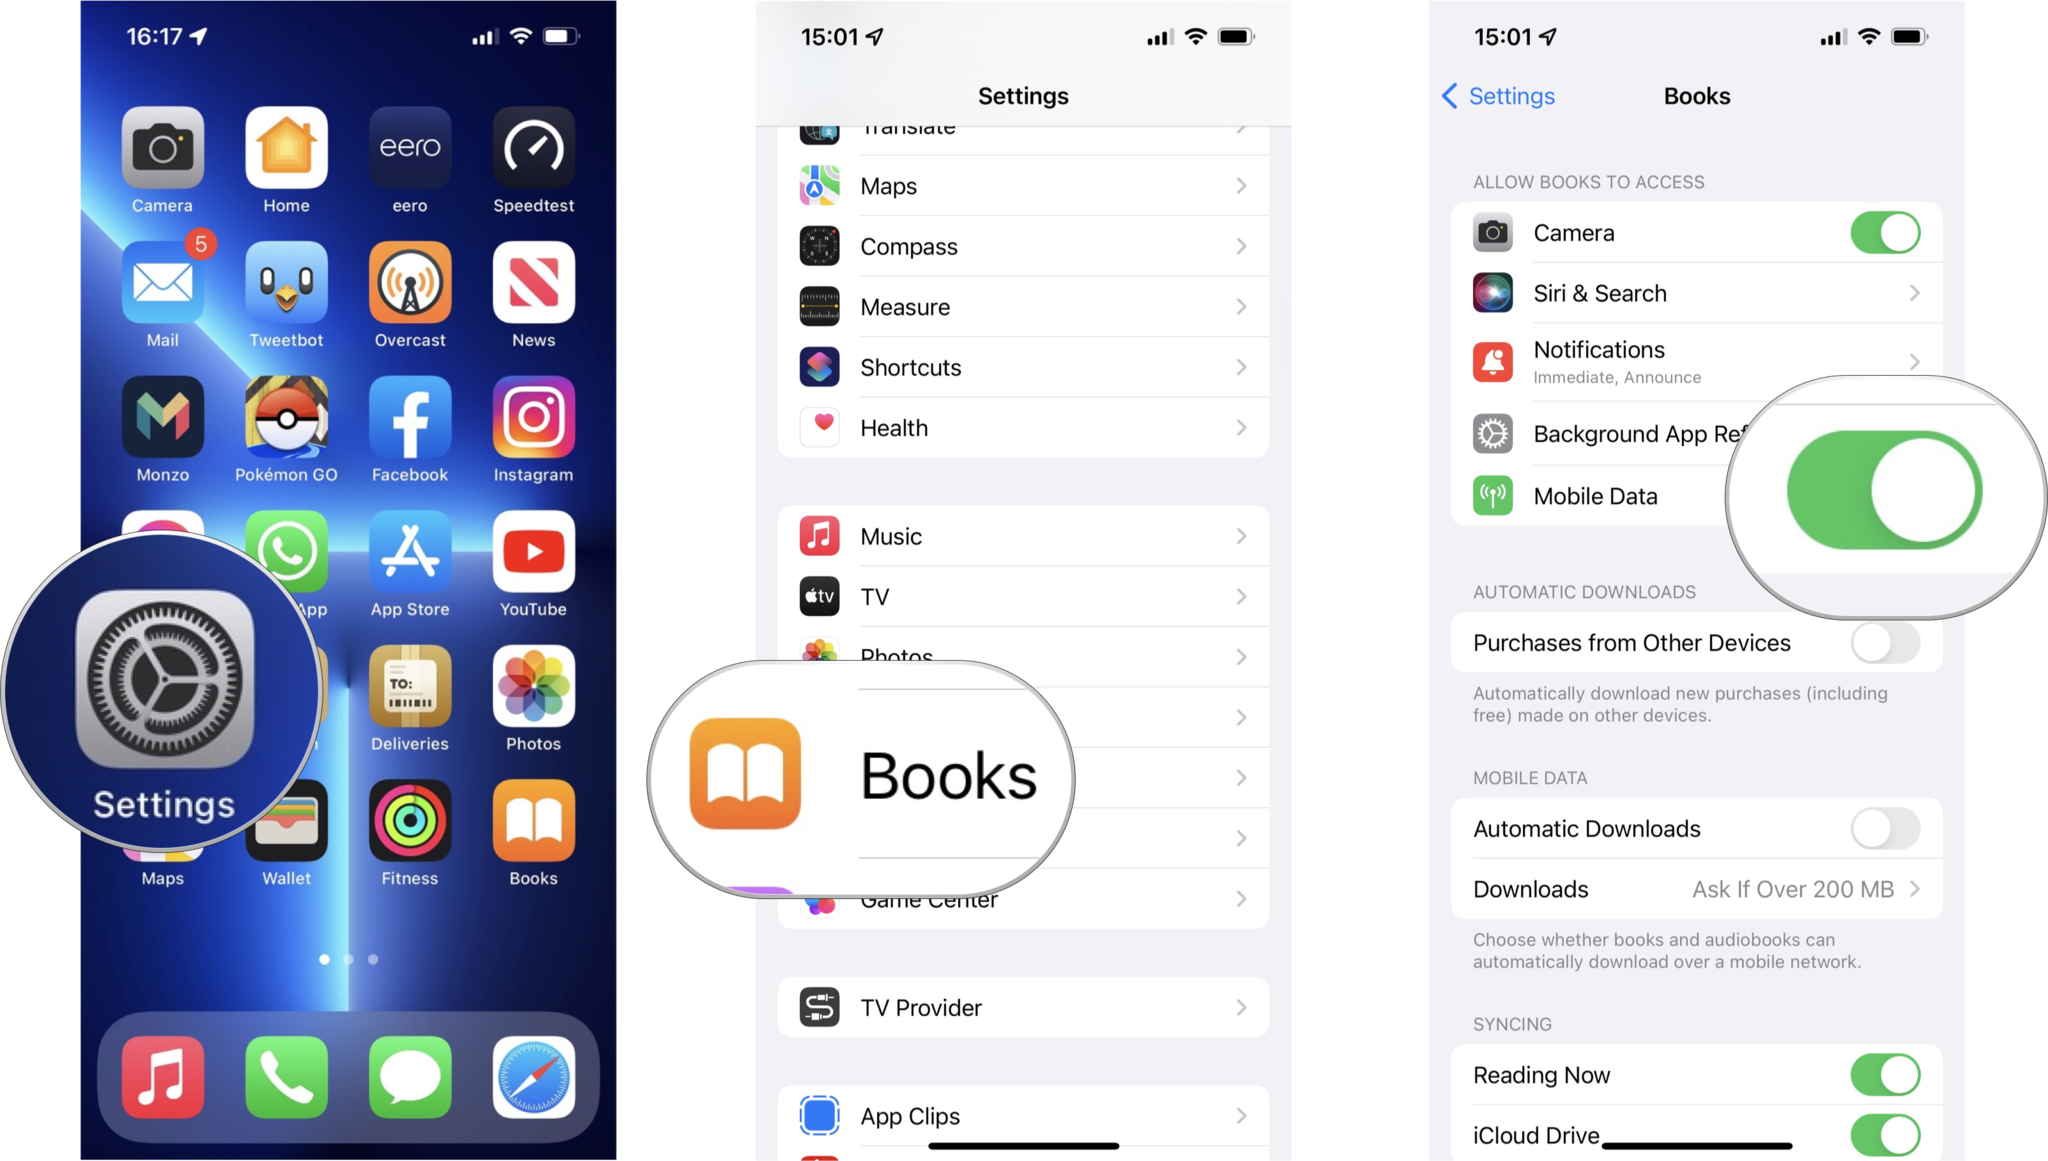 How to fix Apple Books download issues: Tap Settings, tap Books, Turn on Cellular Data